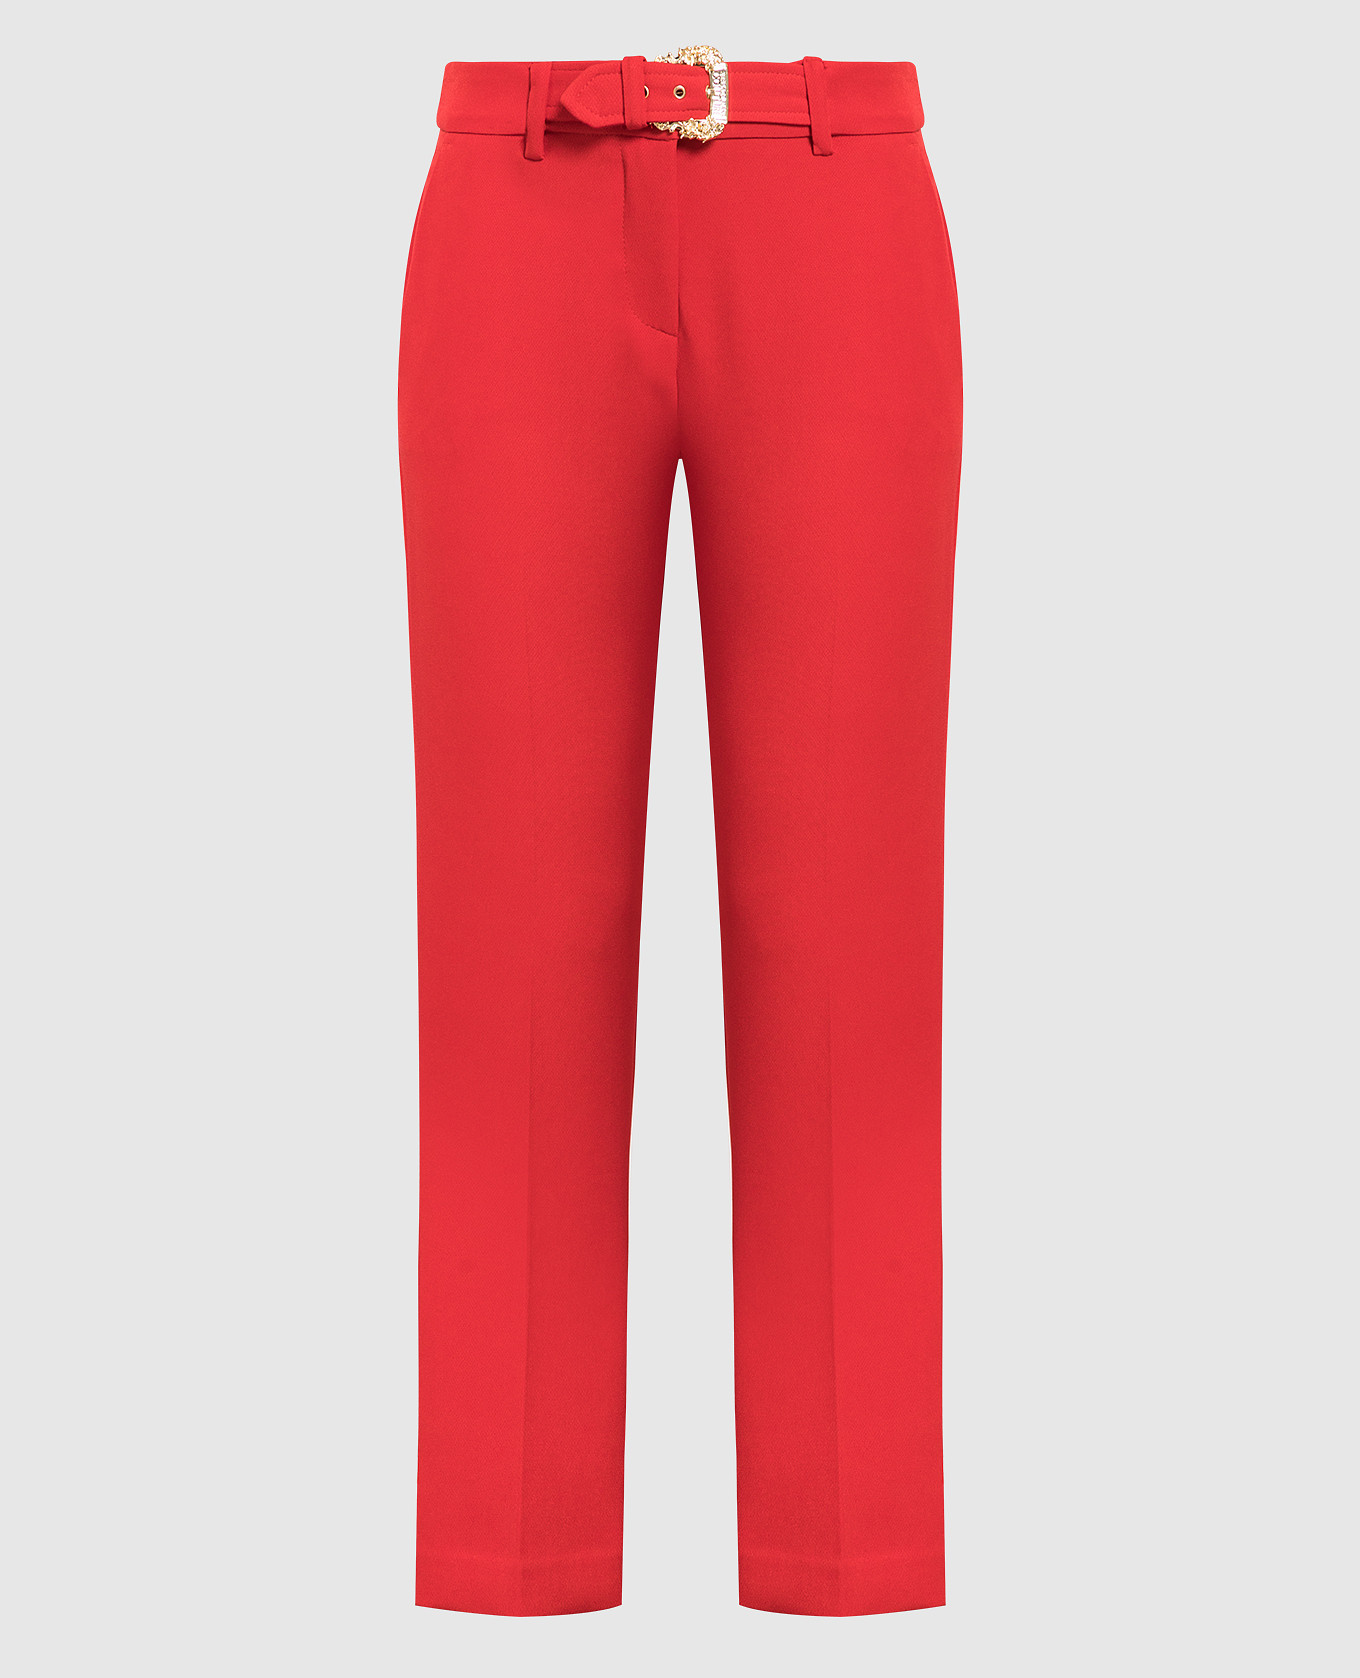 Red pants with a buckle in the baroque style